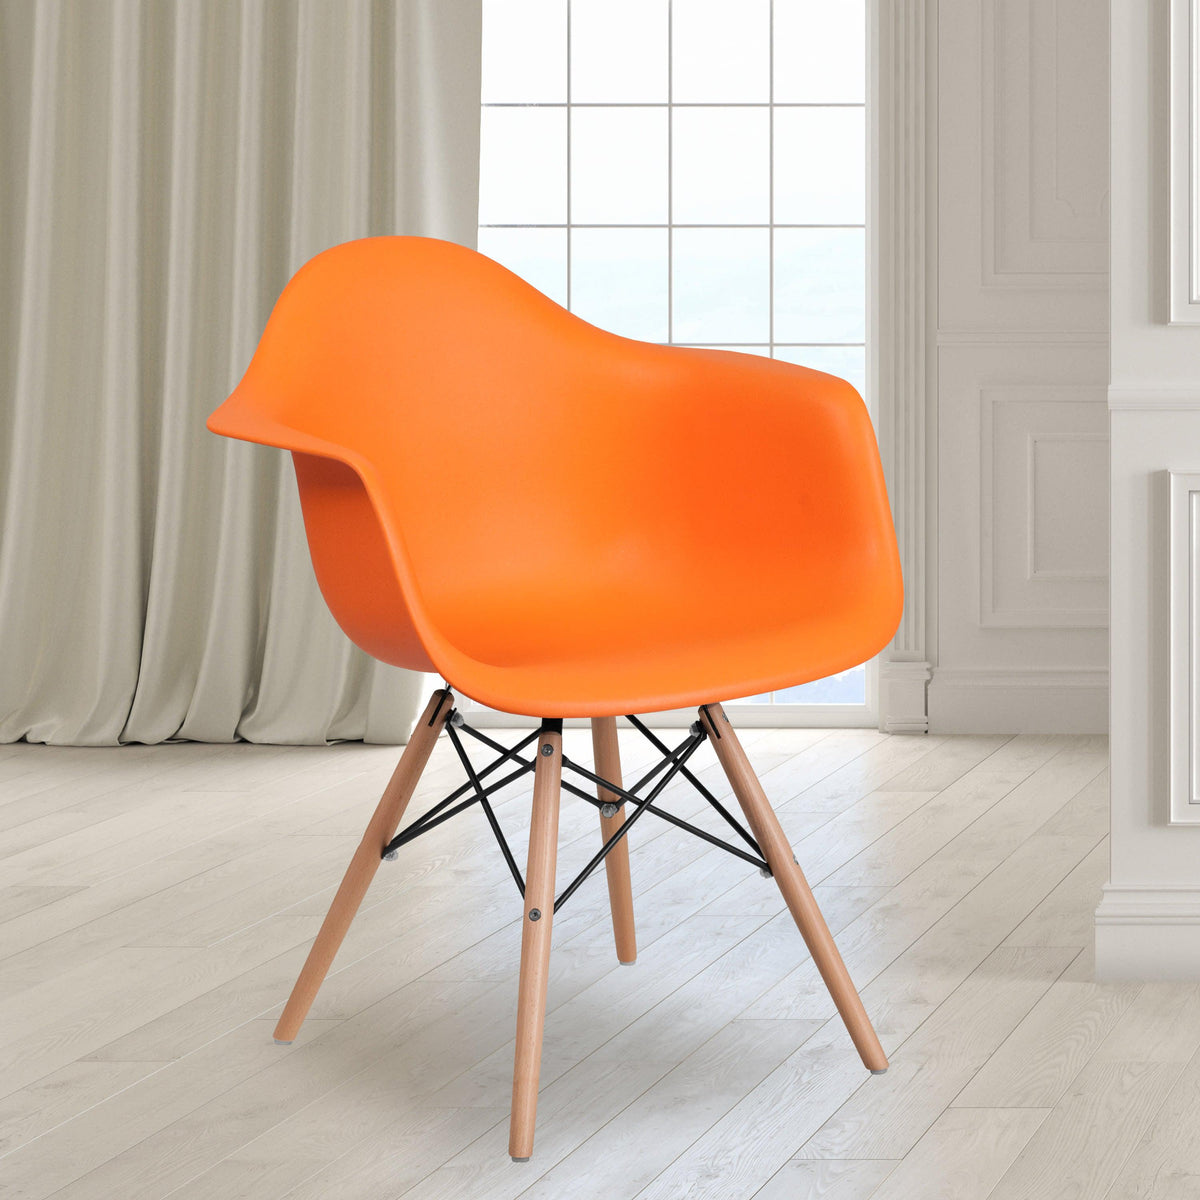 Orange |#| Orange Plastic Chair with Arms and Wooden Legs - Accent & Side Chair